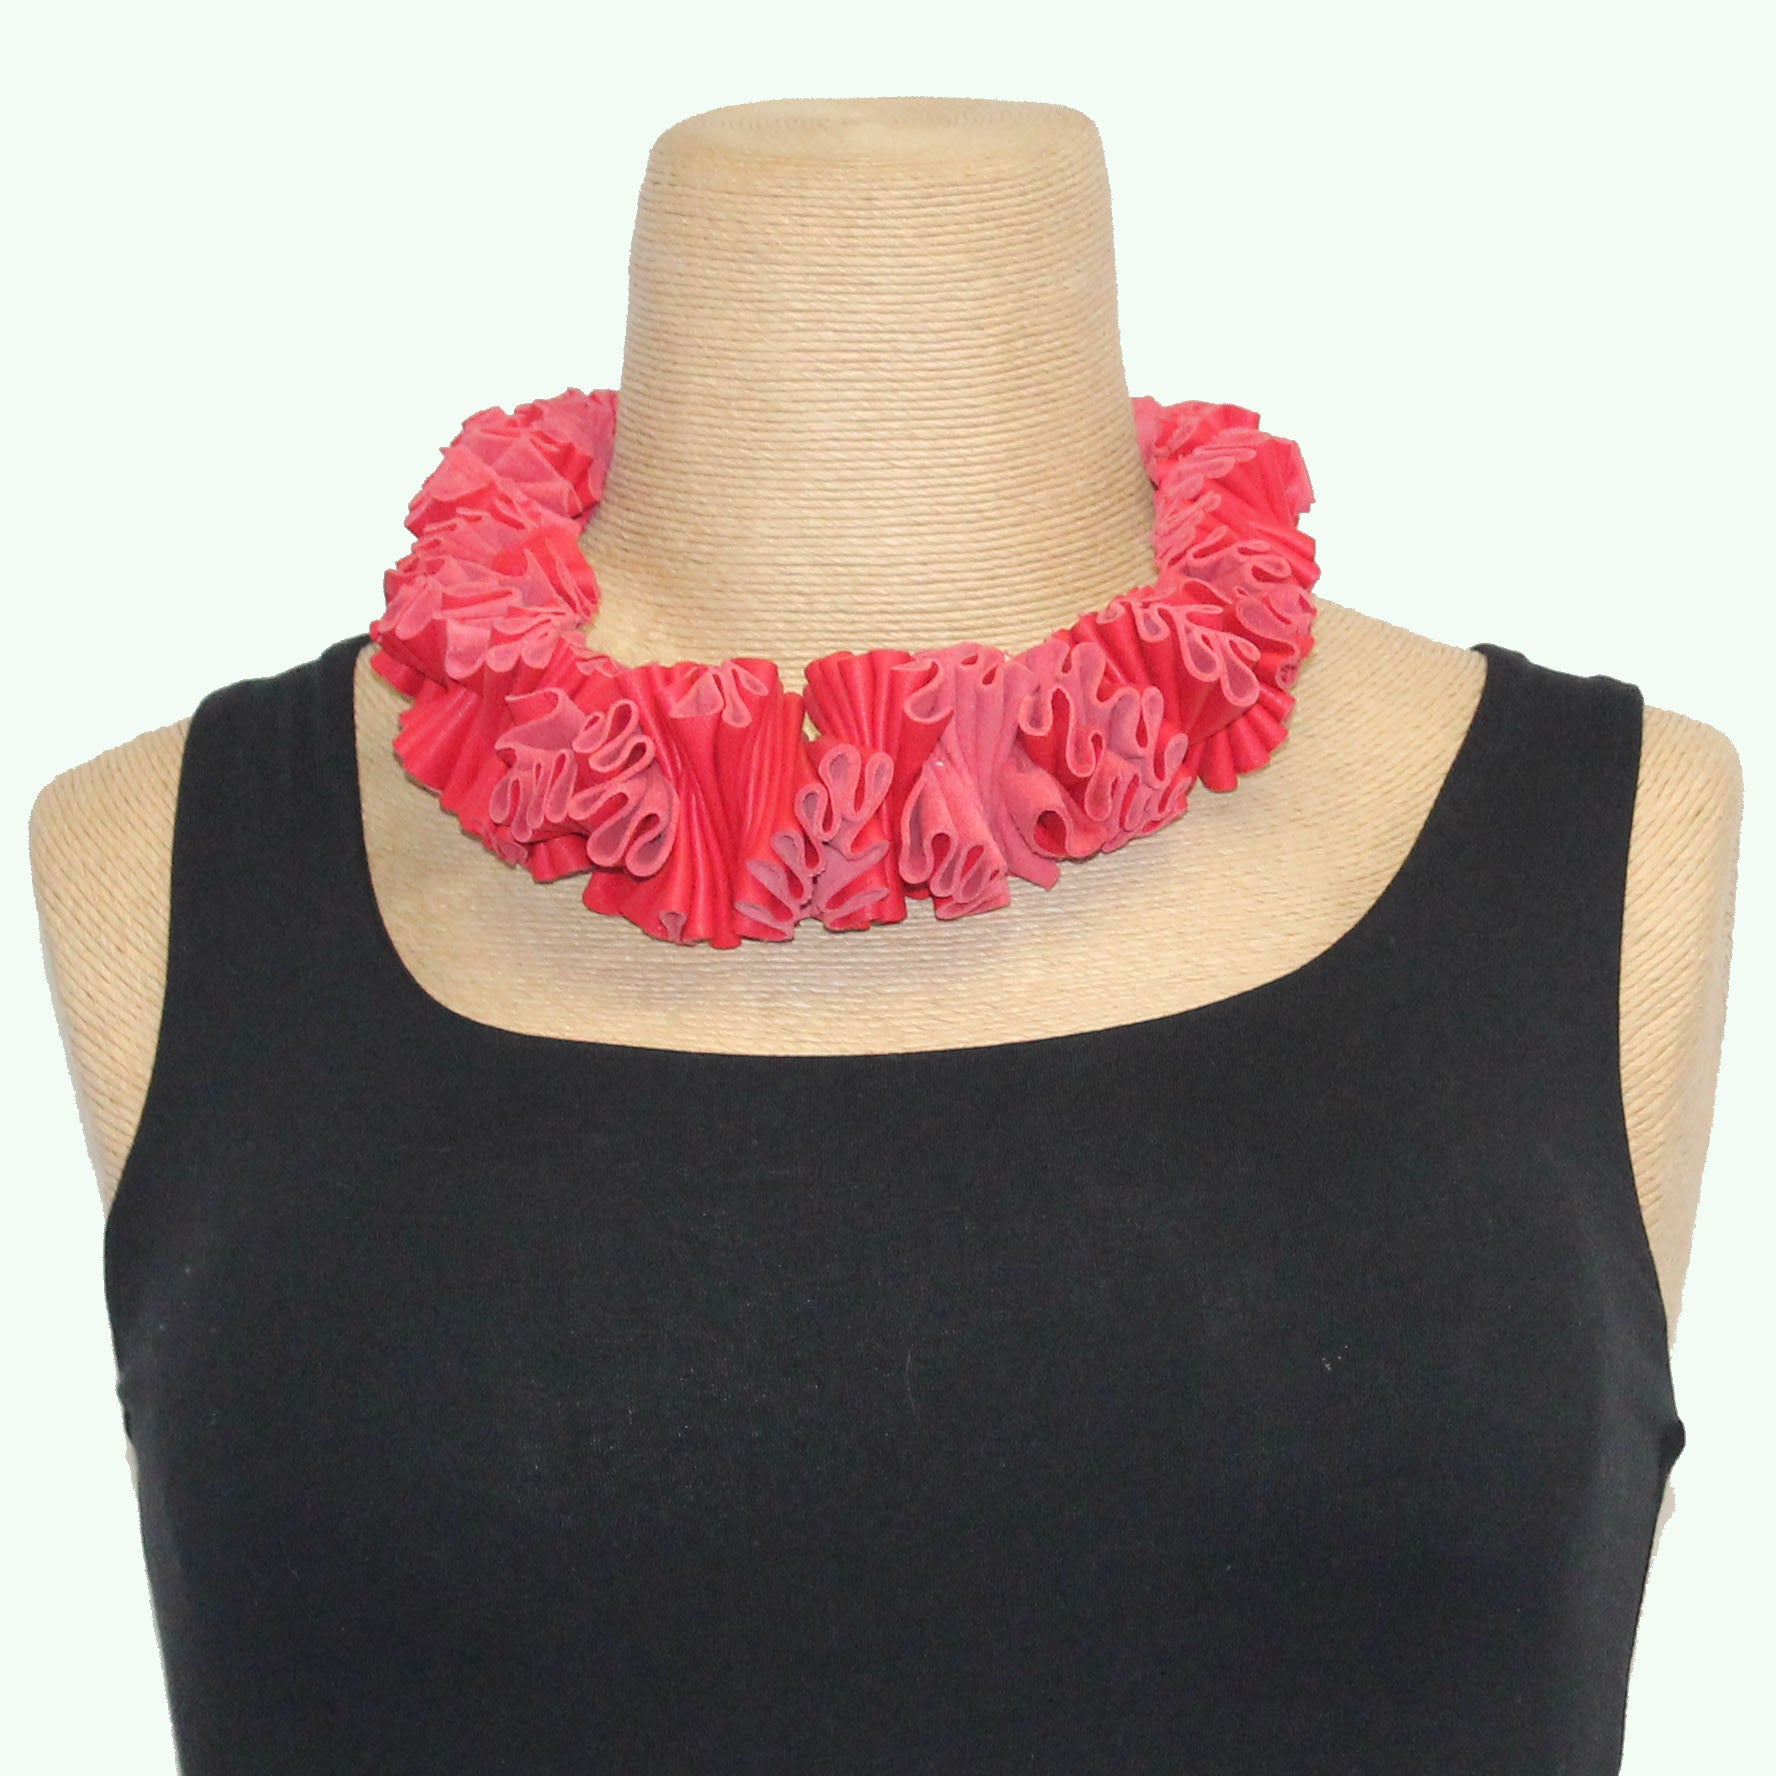 Frank Ideas Necklace, Ruffle Collar, Red